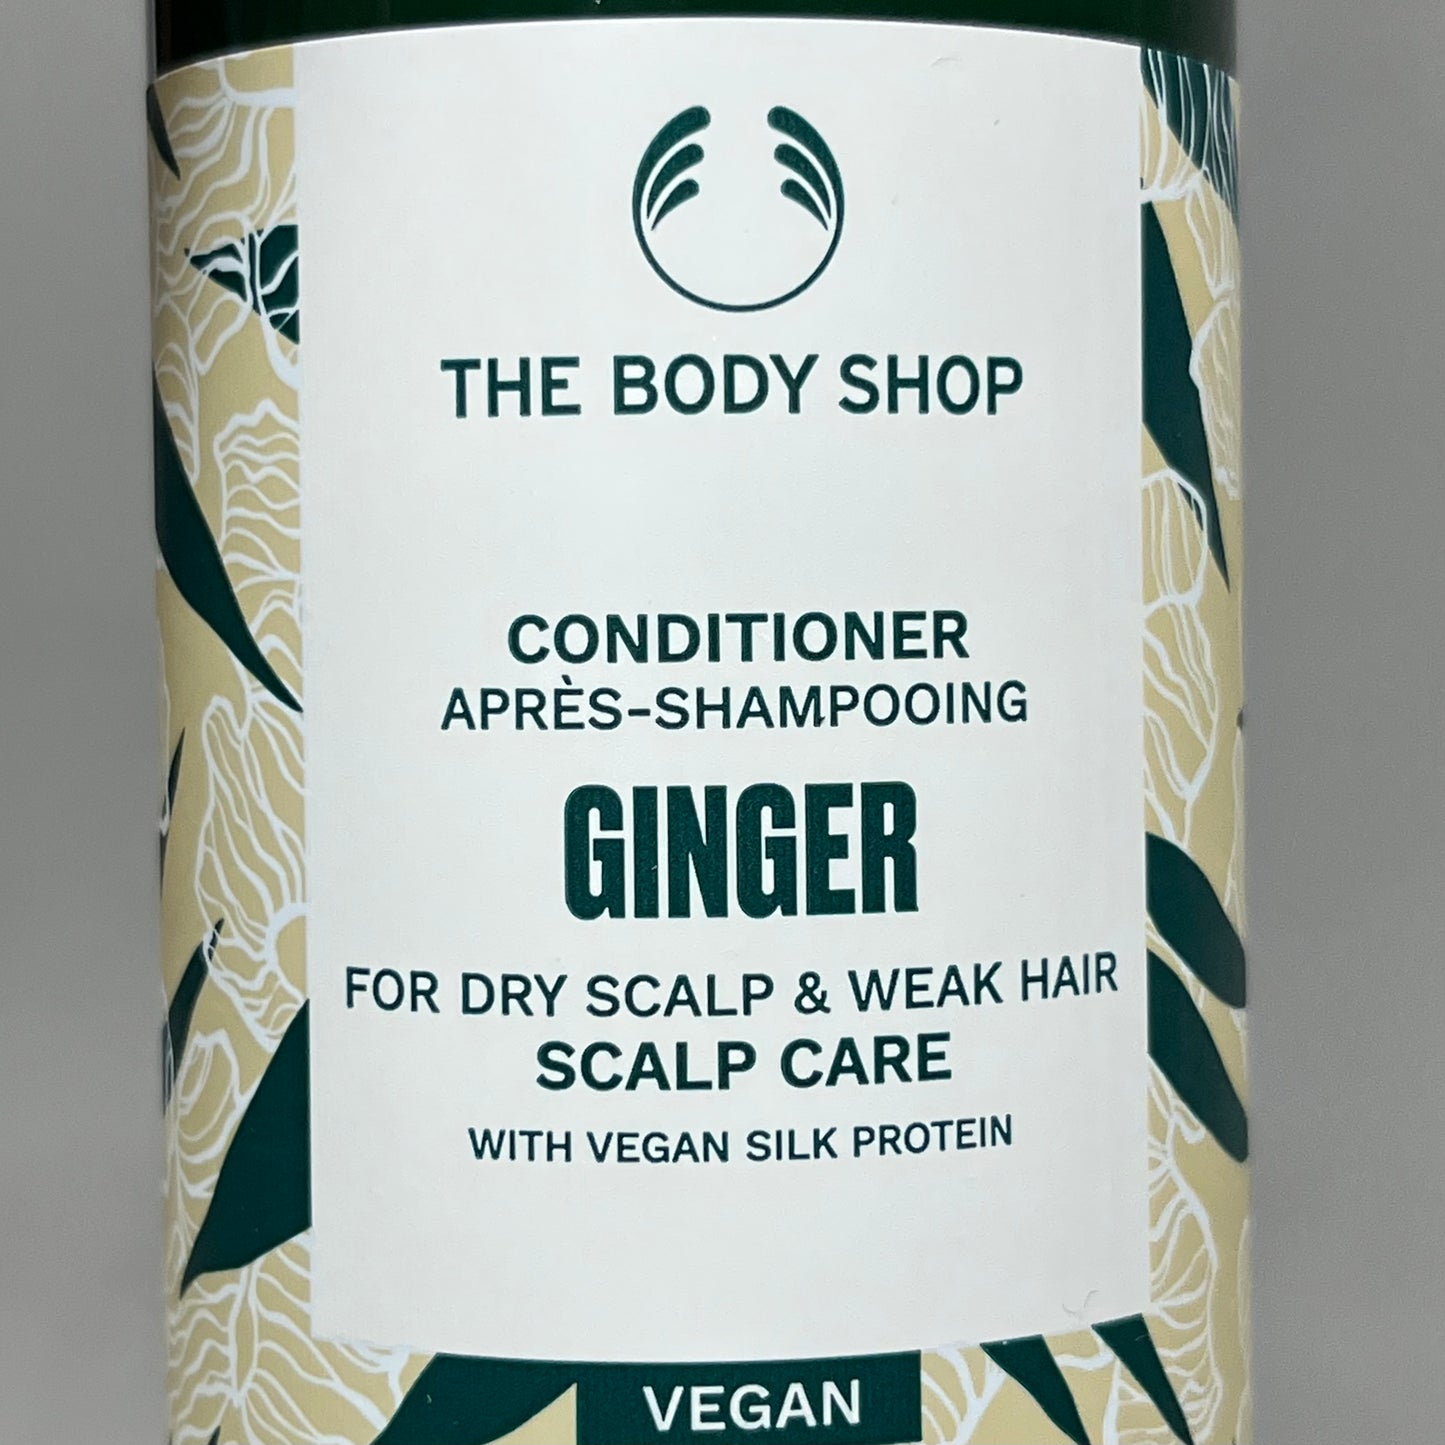 THE BODY SHOP Ginger Scalp Care Conditioner 8.4 oz (New)